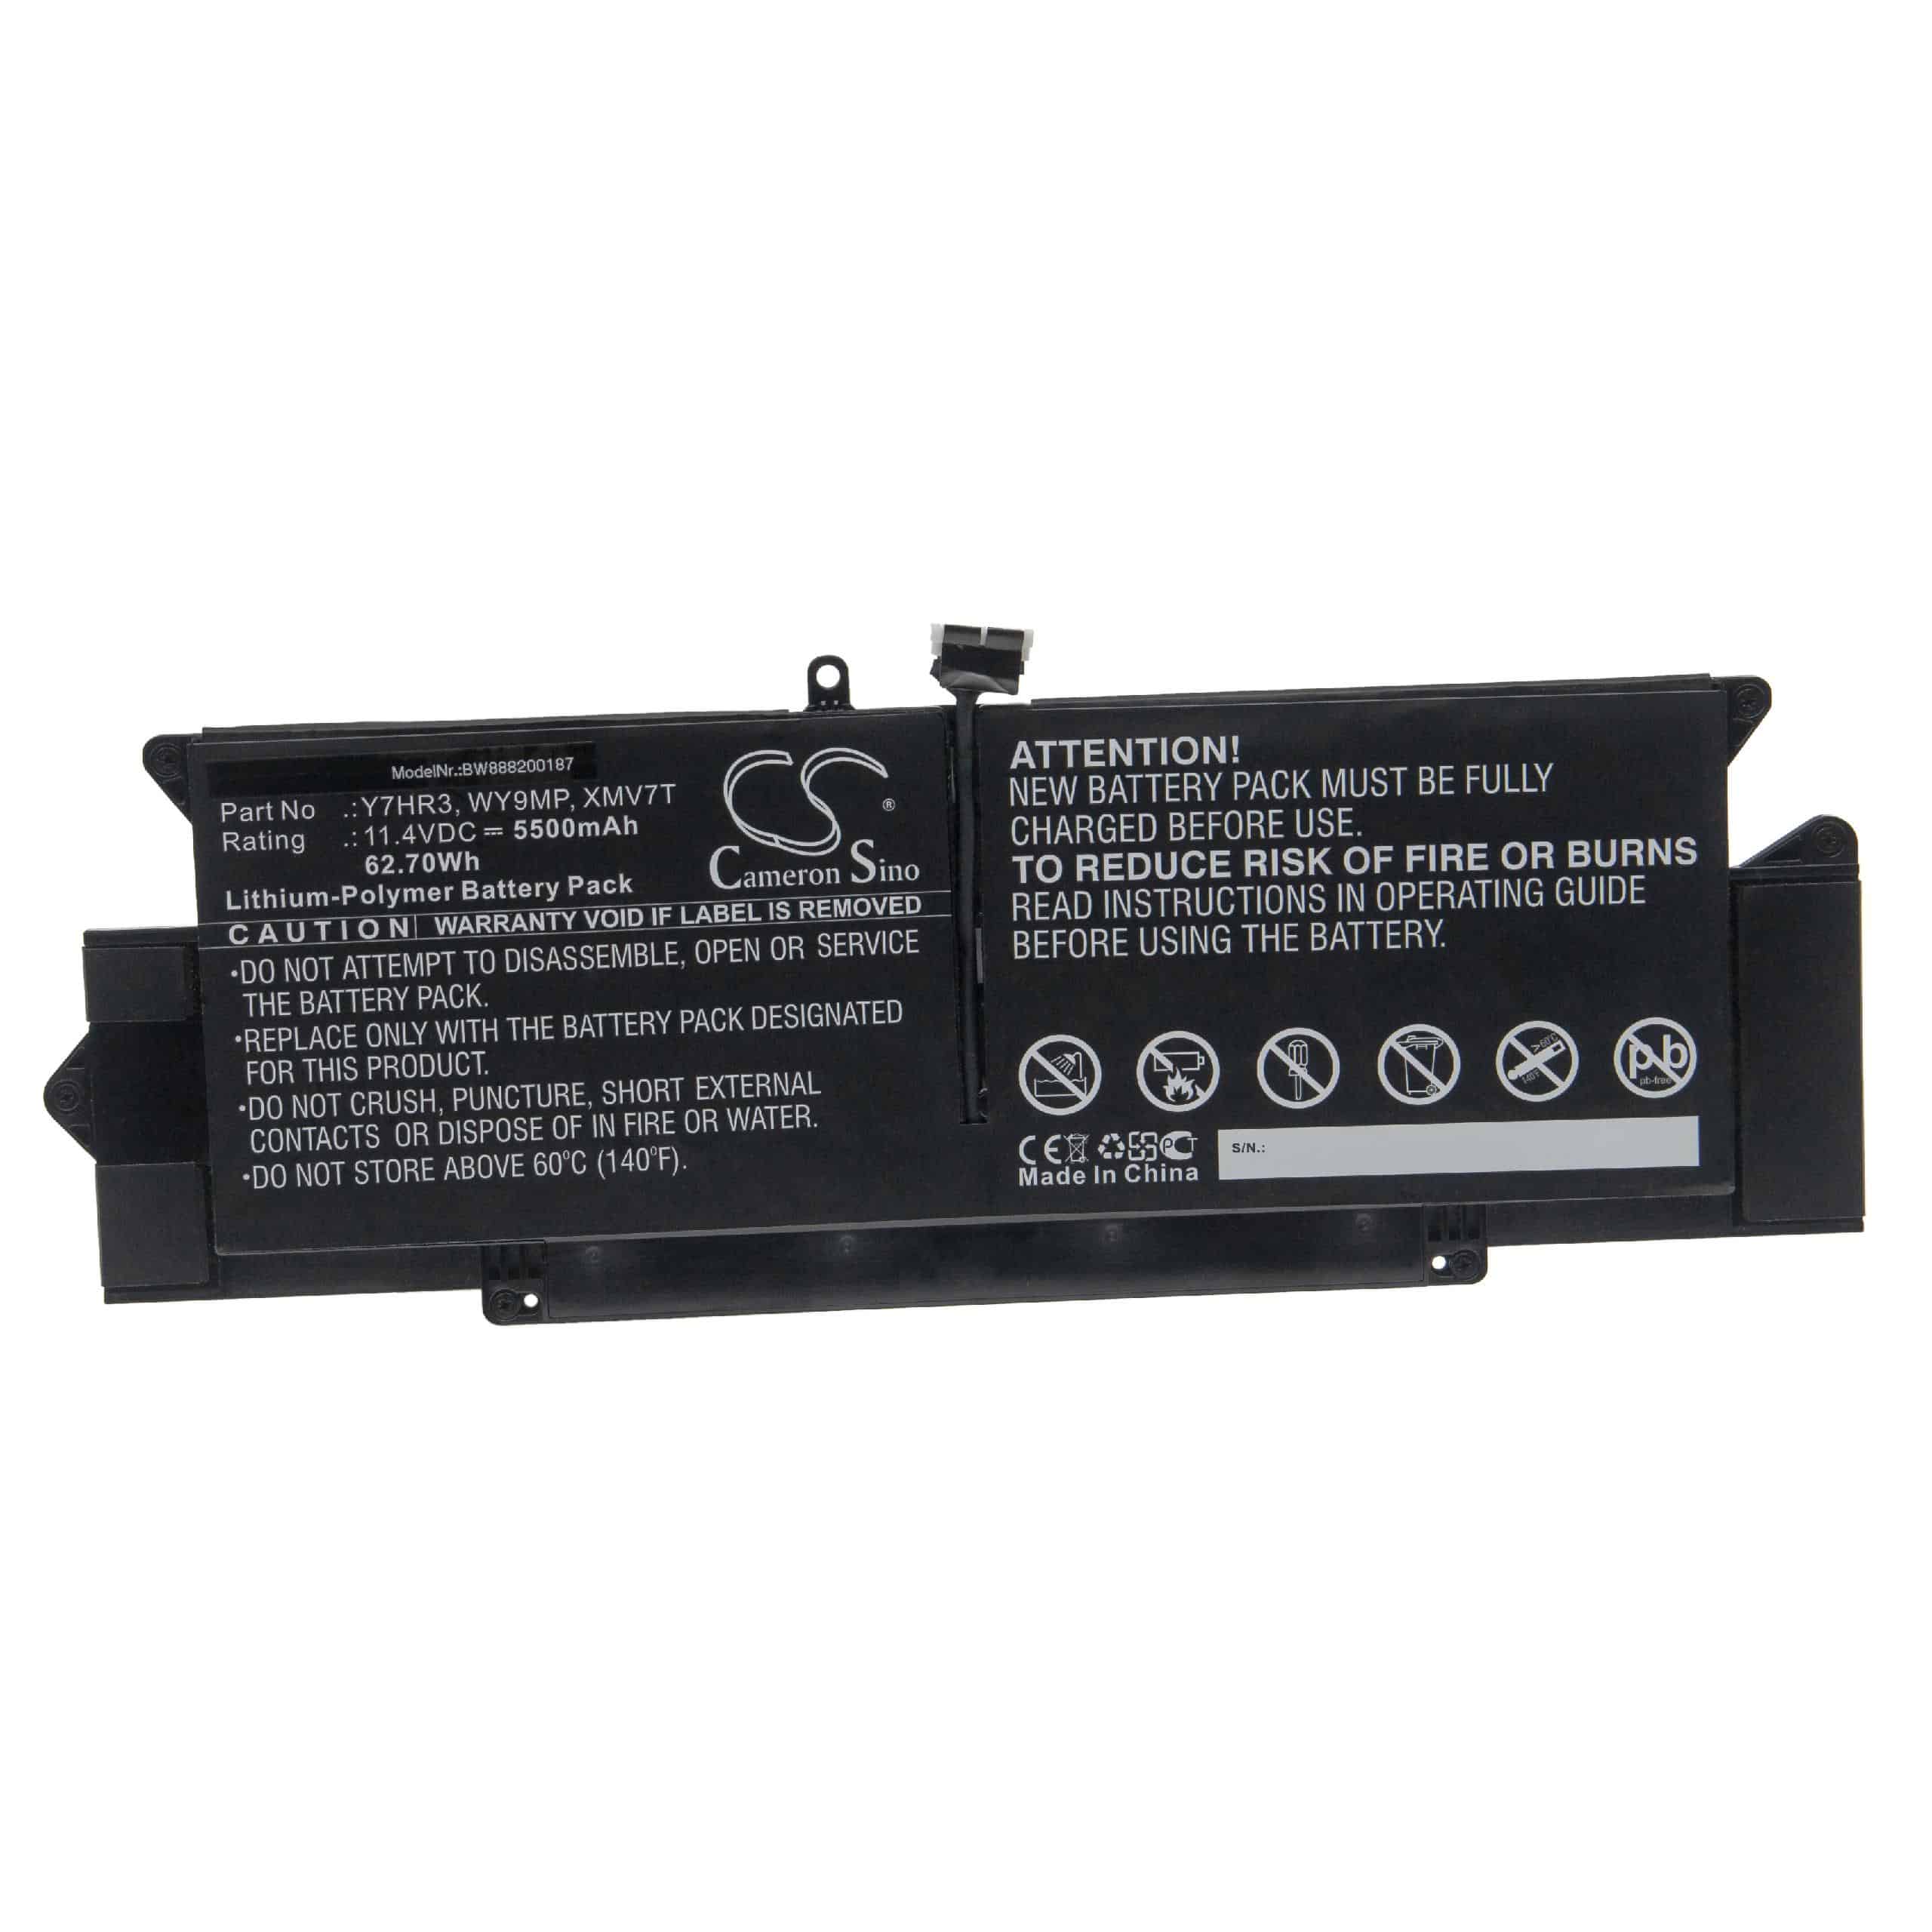 Notebook Battery Replacement for Dell Y7HR3, YJ9RP, WY9MP, XMV7T, 35J09, 7YX5Y - 5500mAh 11.4V Li-polymer